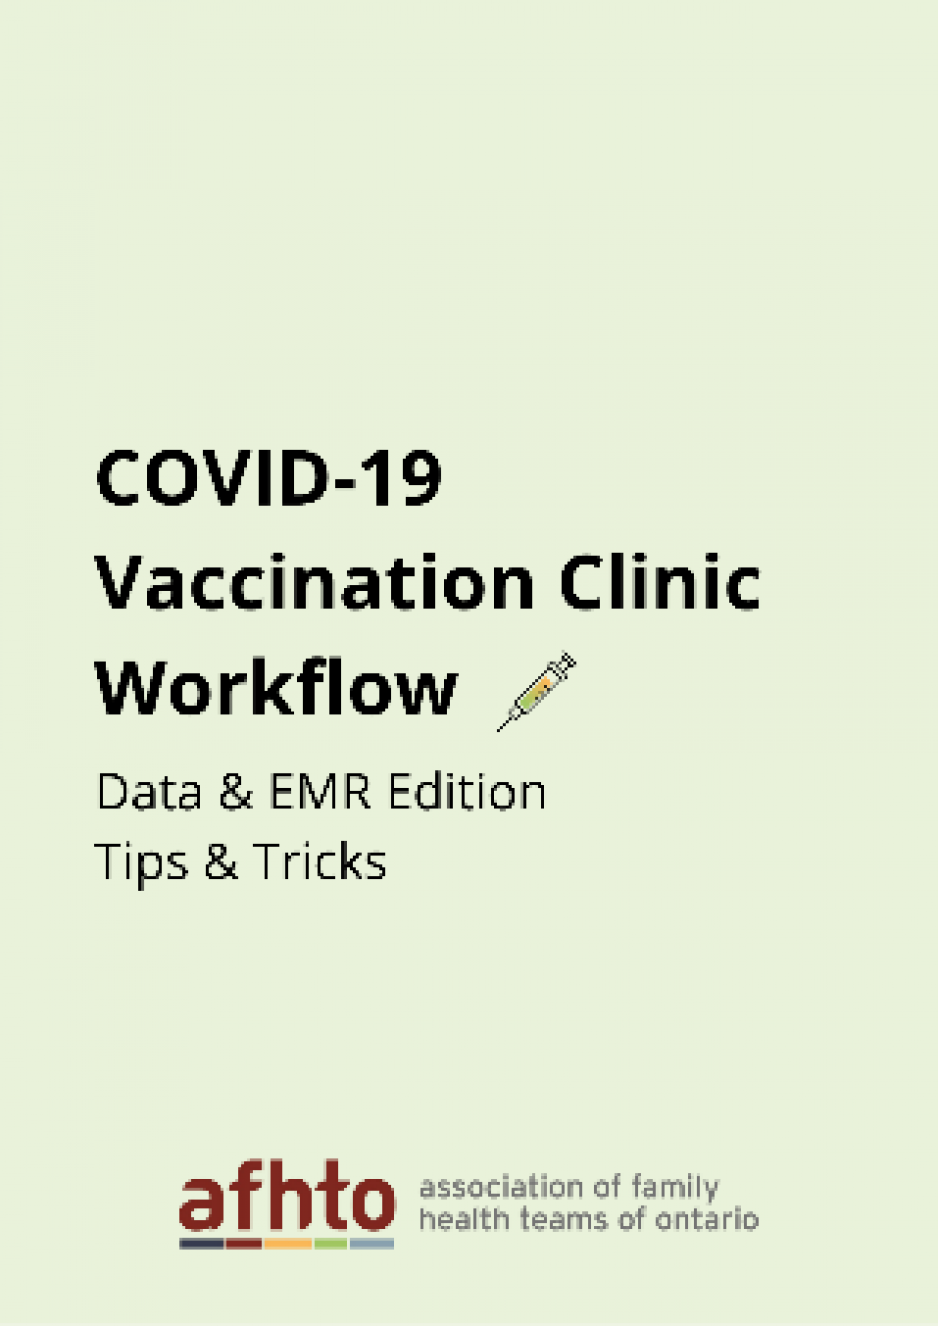 COVID-19 vaccination clinic workflow cover data & emr edition tips & tricks